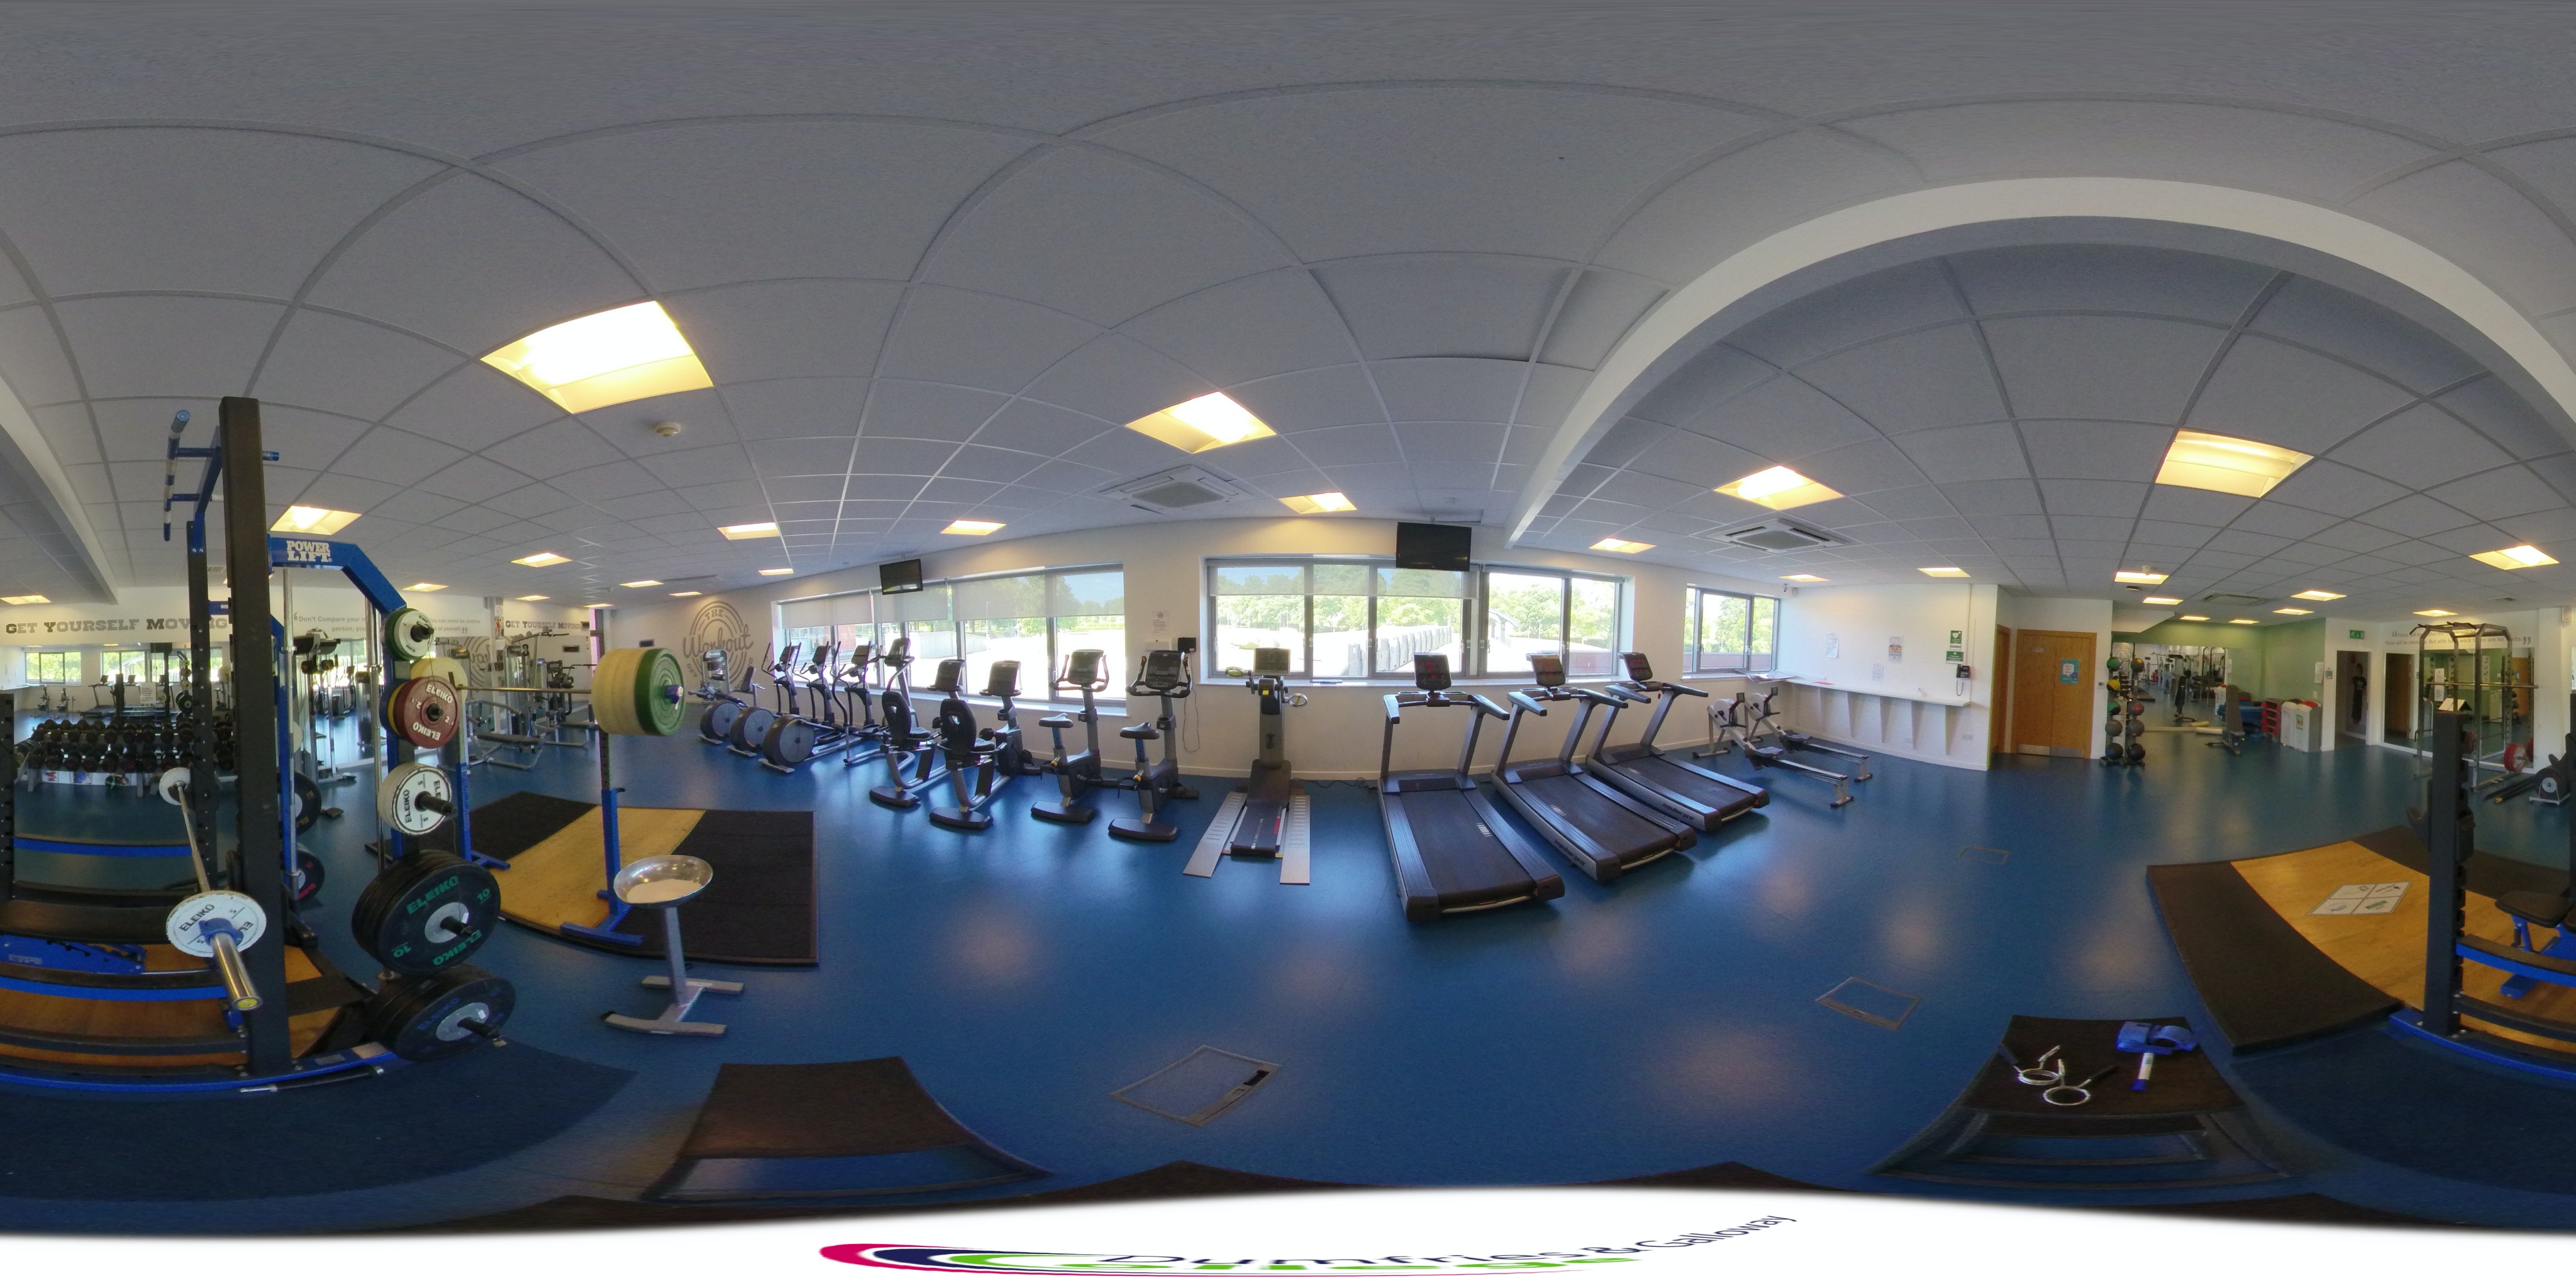 360 Photo of The Workout Gym